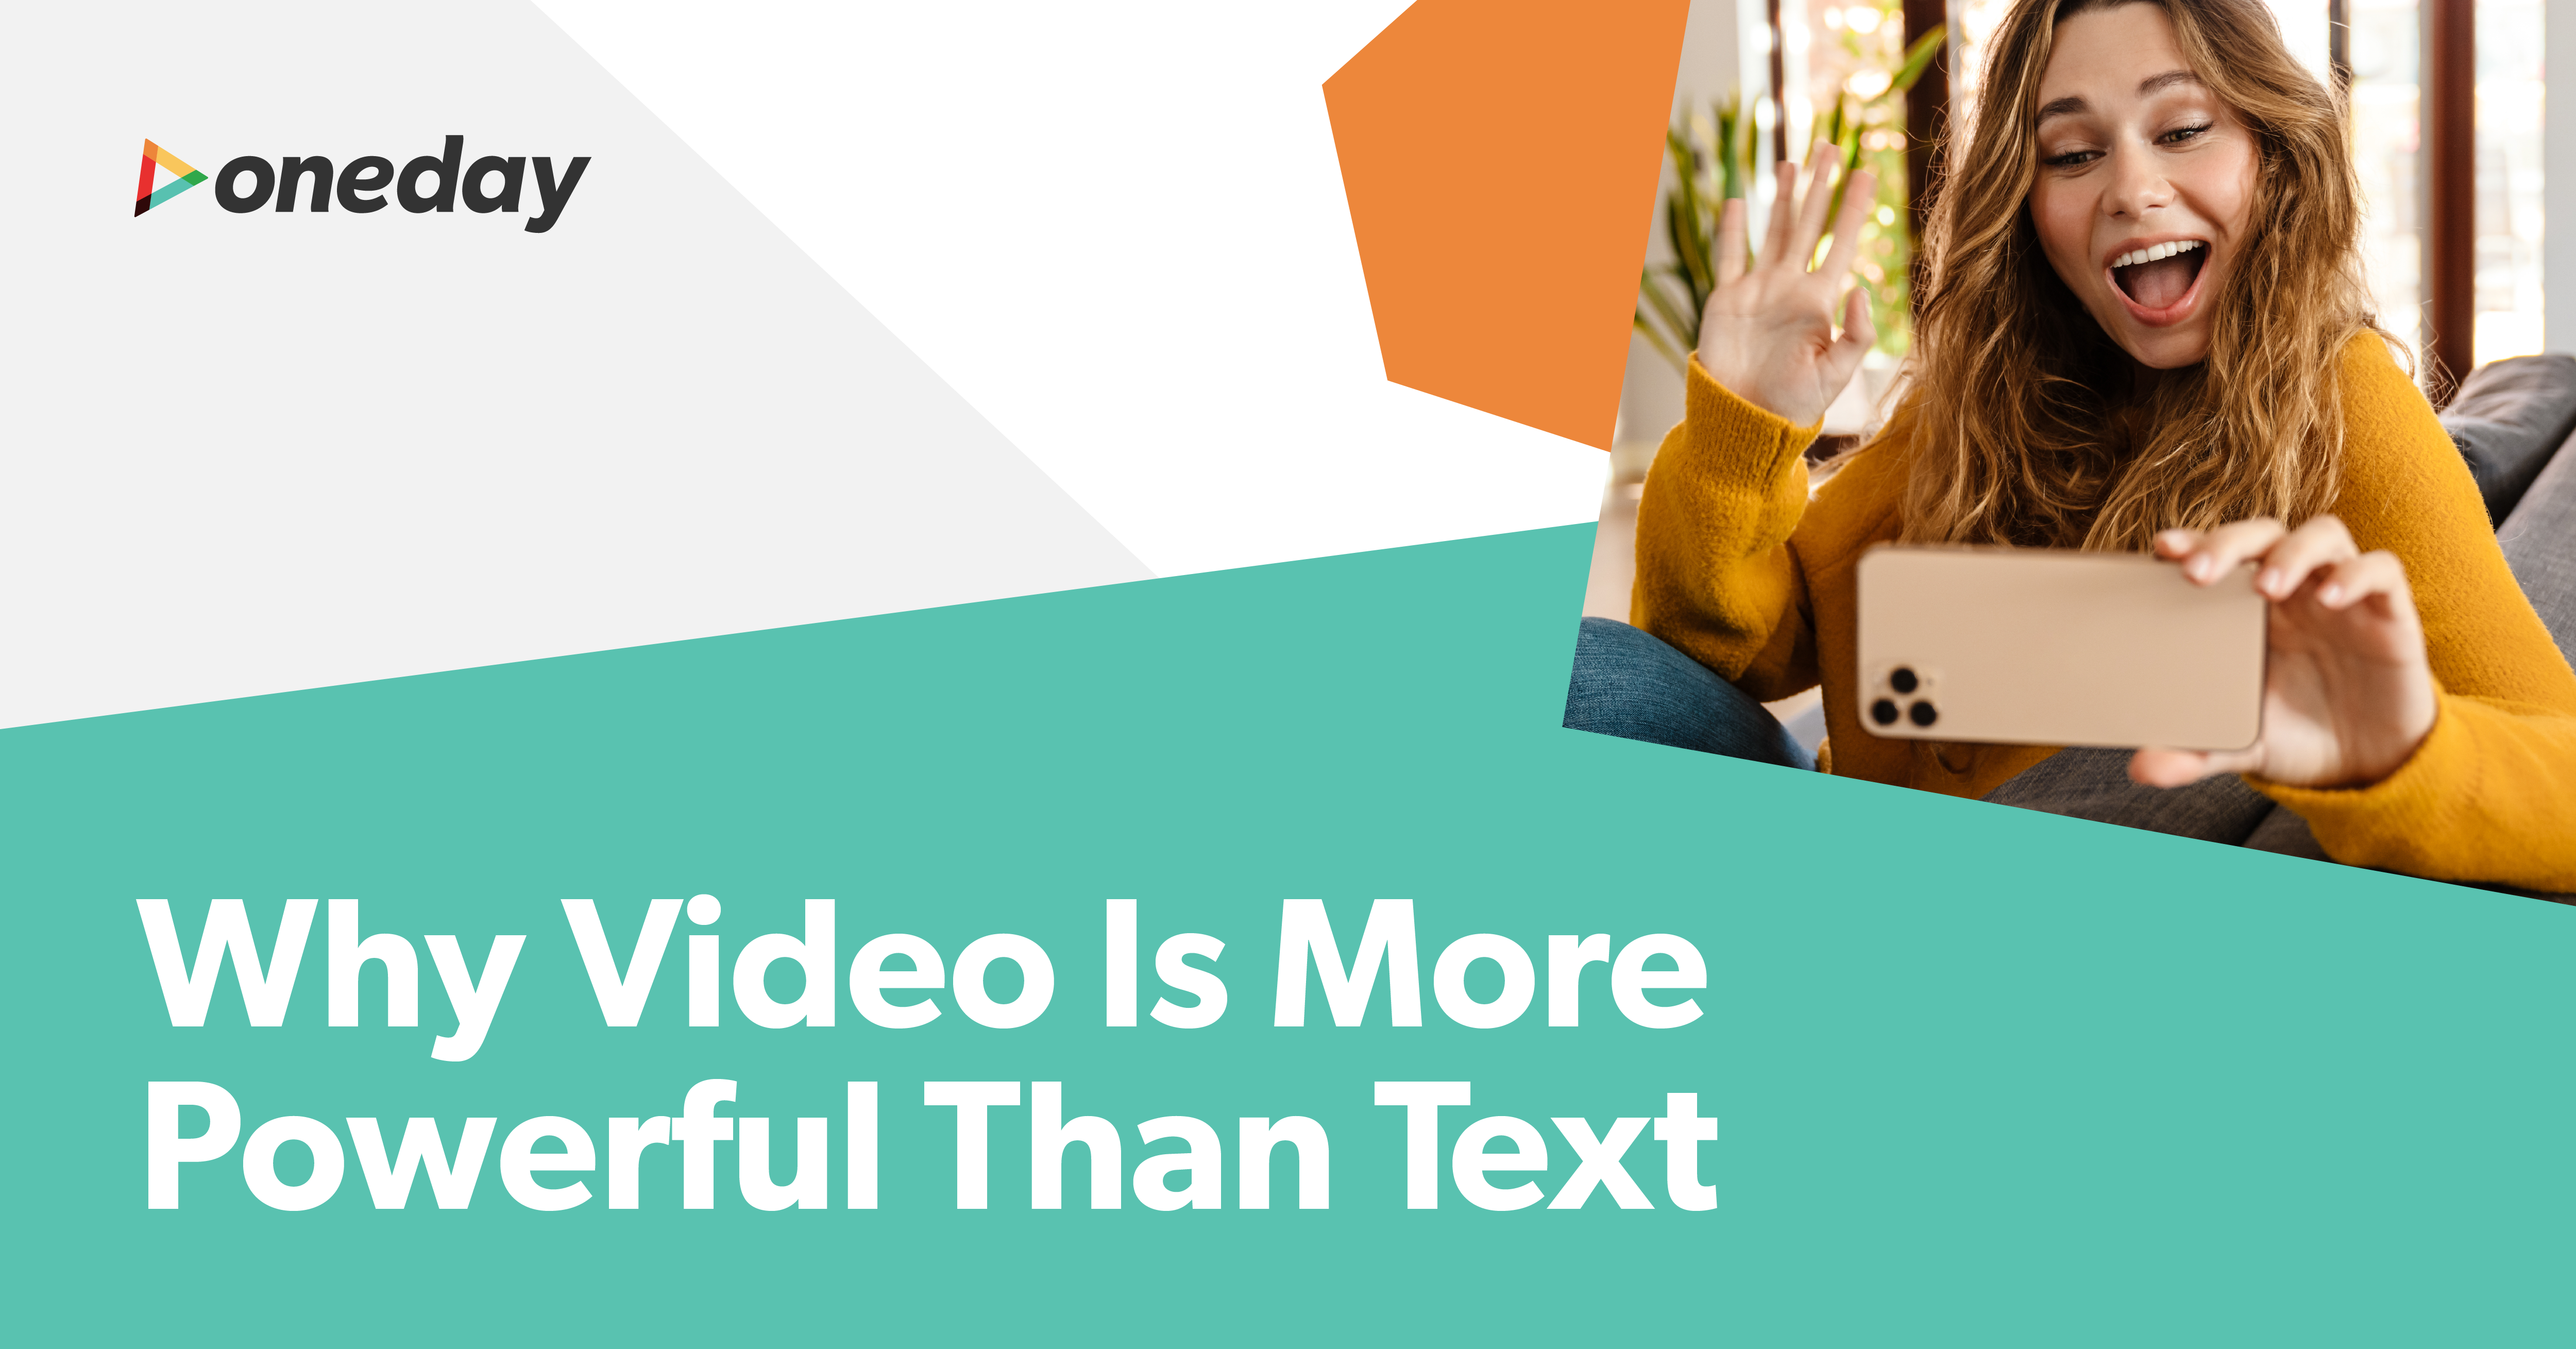 A discussion on the many reasons why video content is so much more powerful than text for driving engagement.